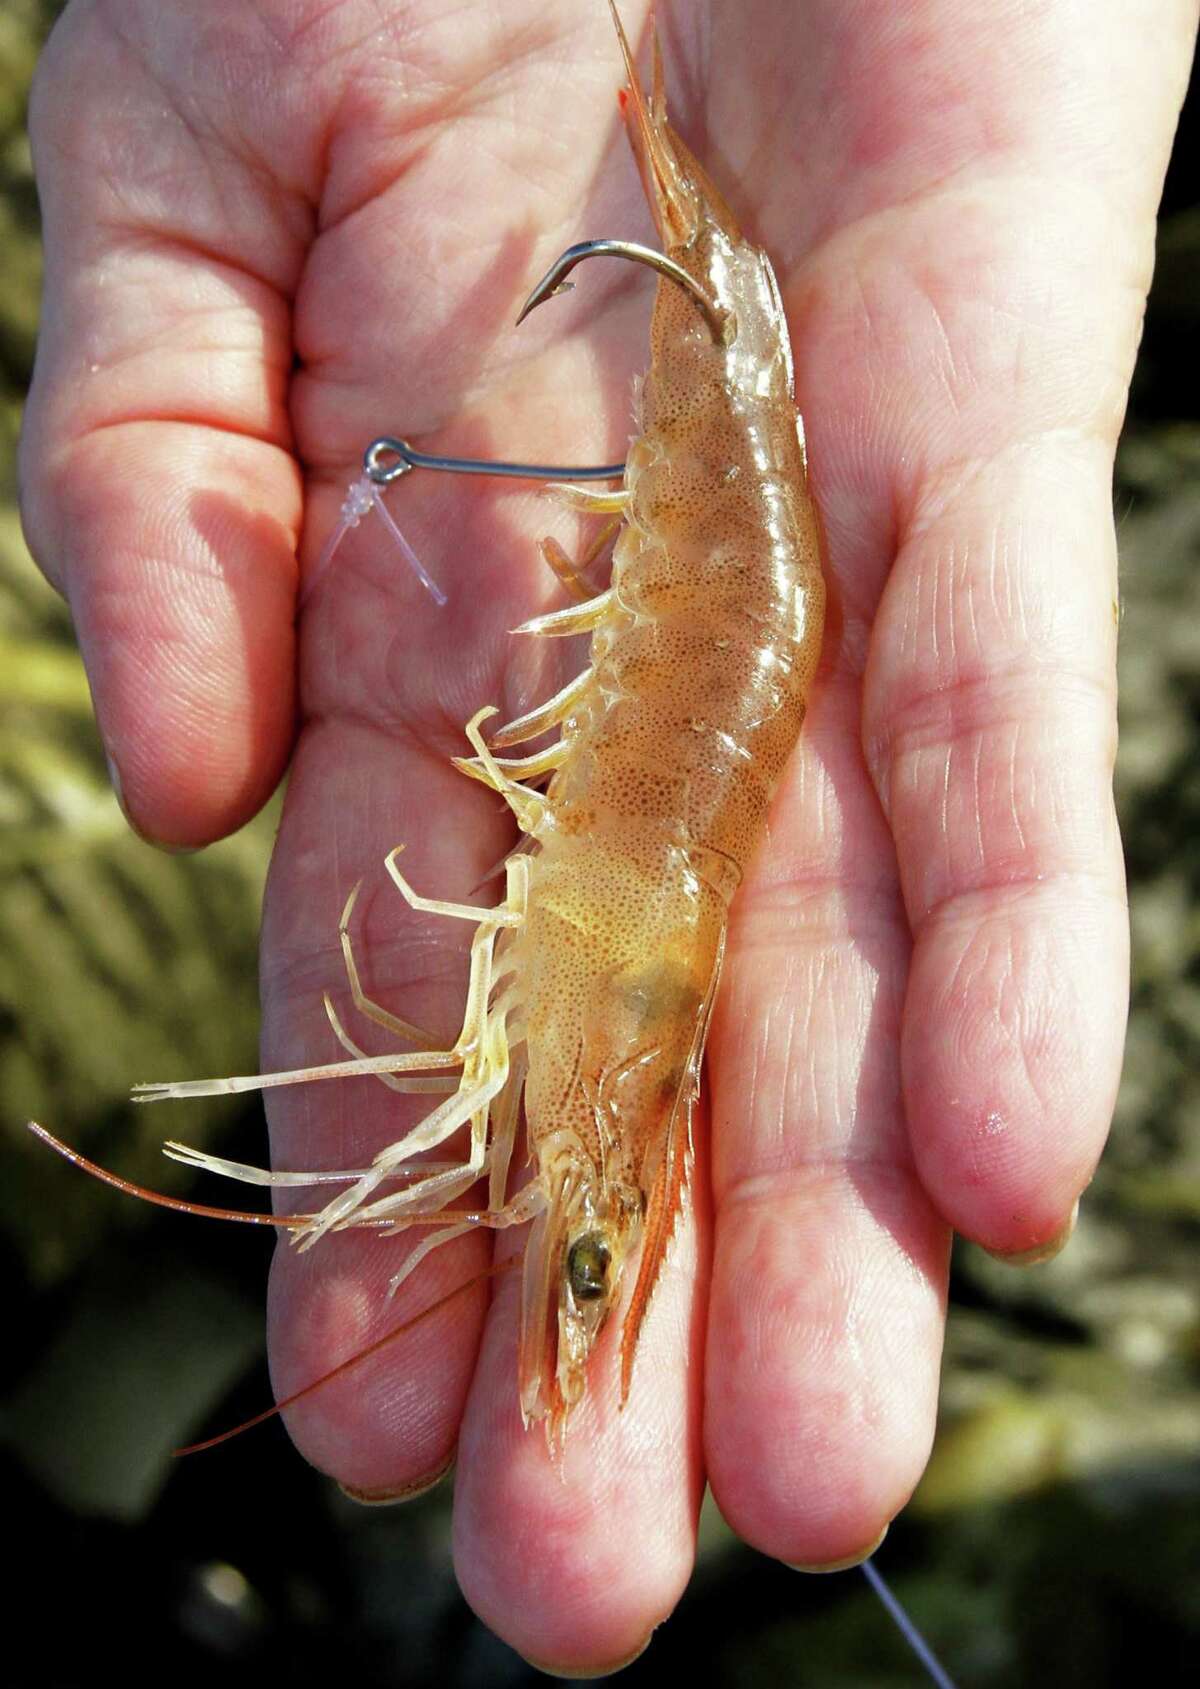 Live shrimp are the most popular - and most productive - bait used by Texas coastal anglers. The crustaceans account for an estimated 25 percent of all fish caught by anglers fishing from private boats.